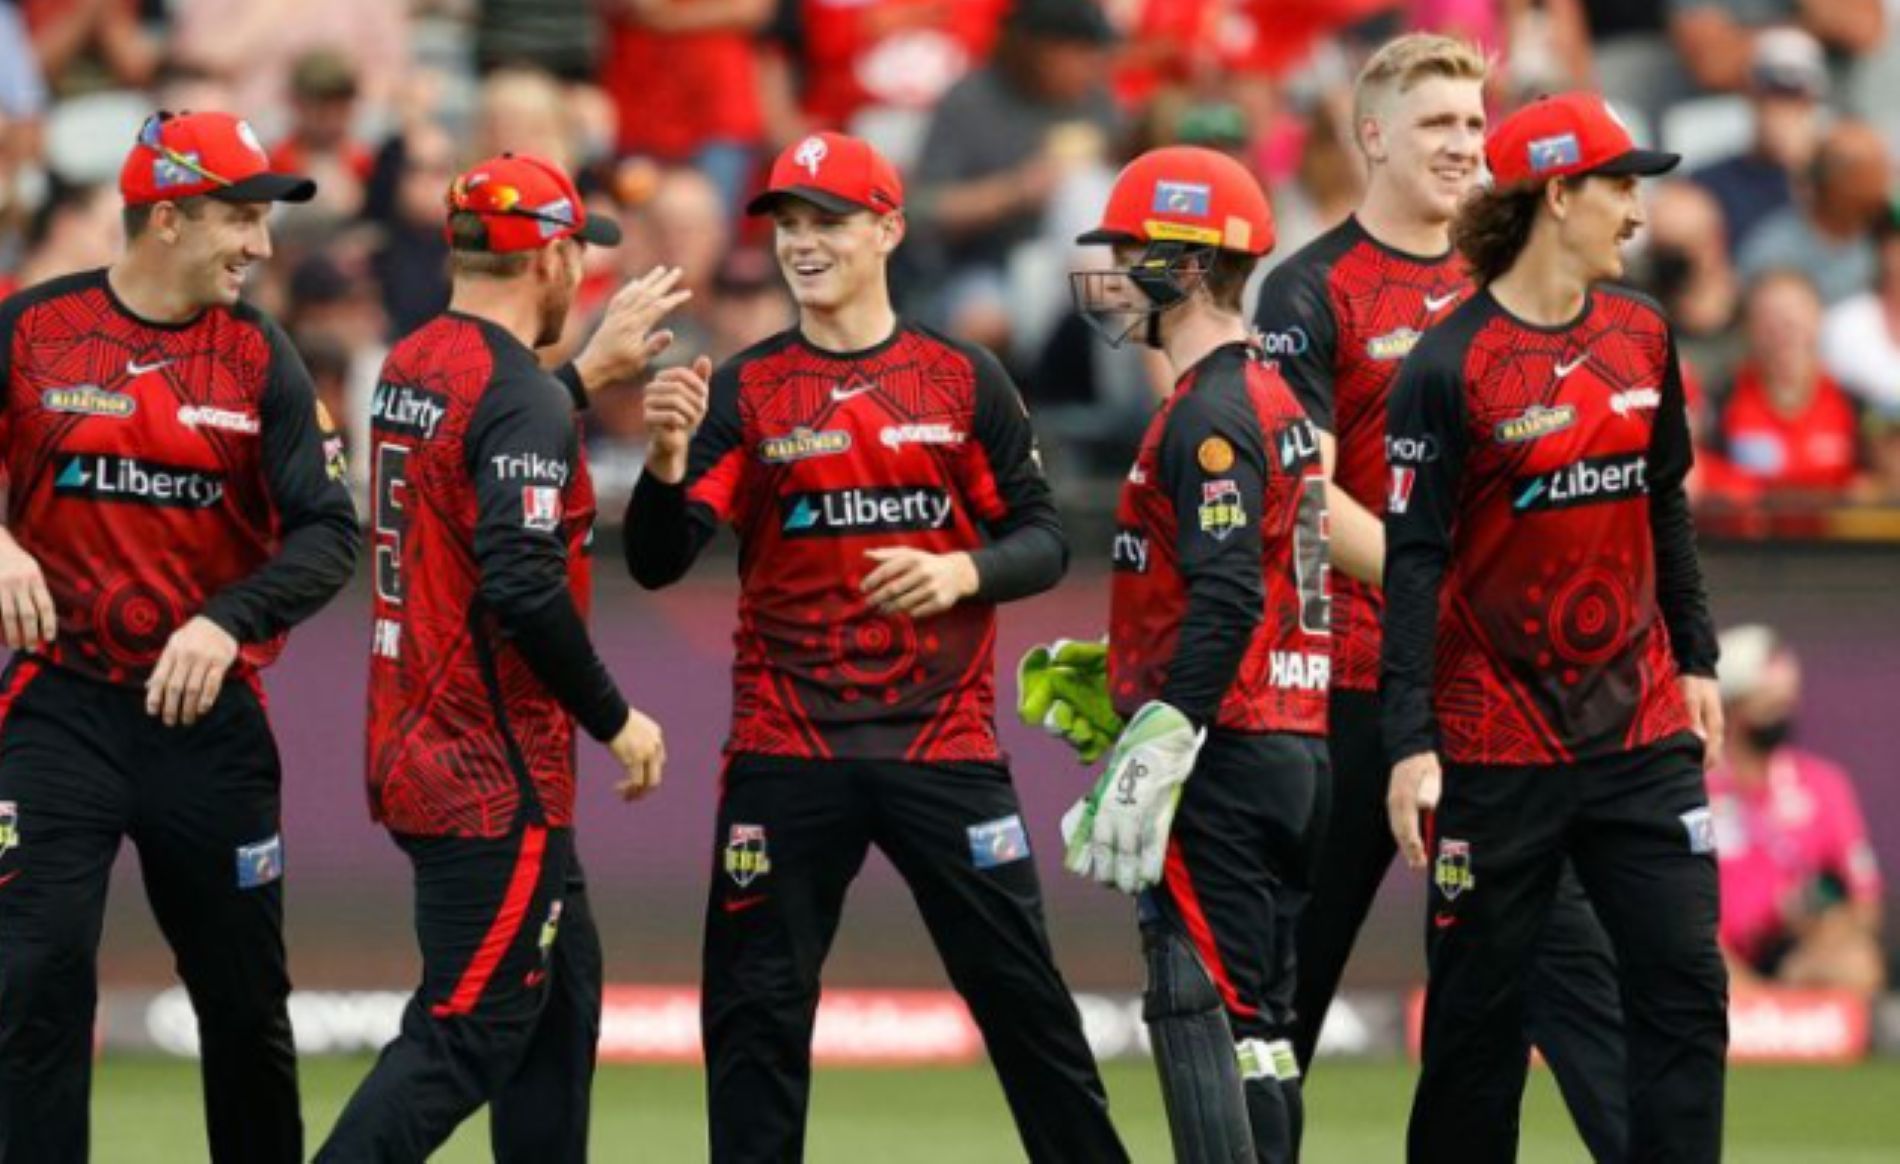 The Renegades will look to go a step further from last year.